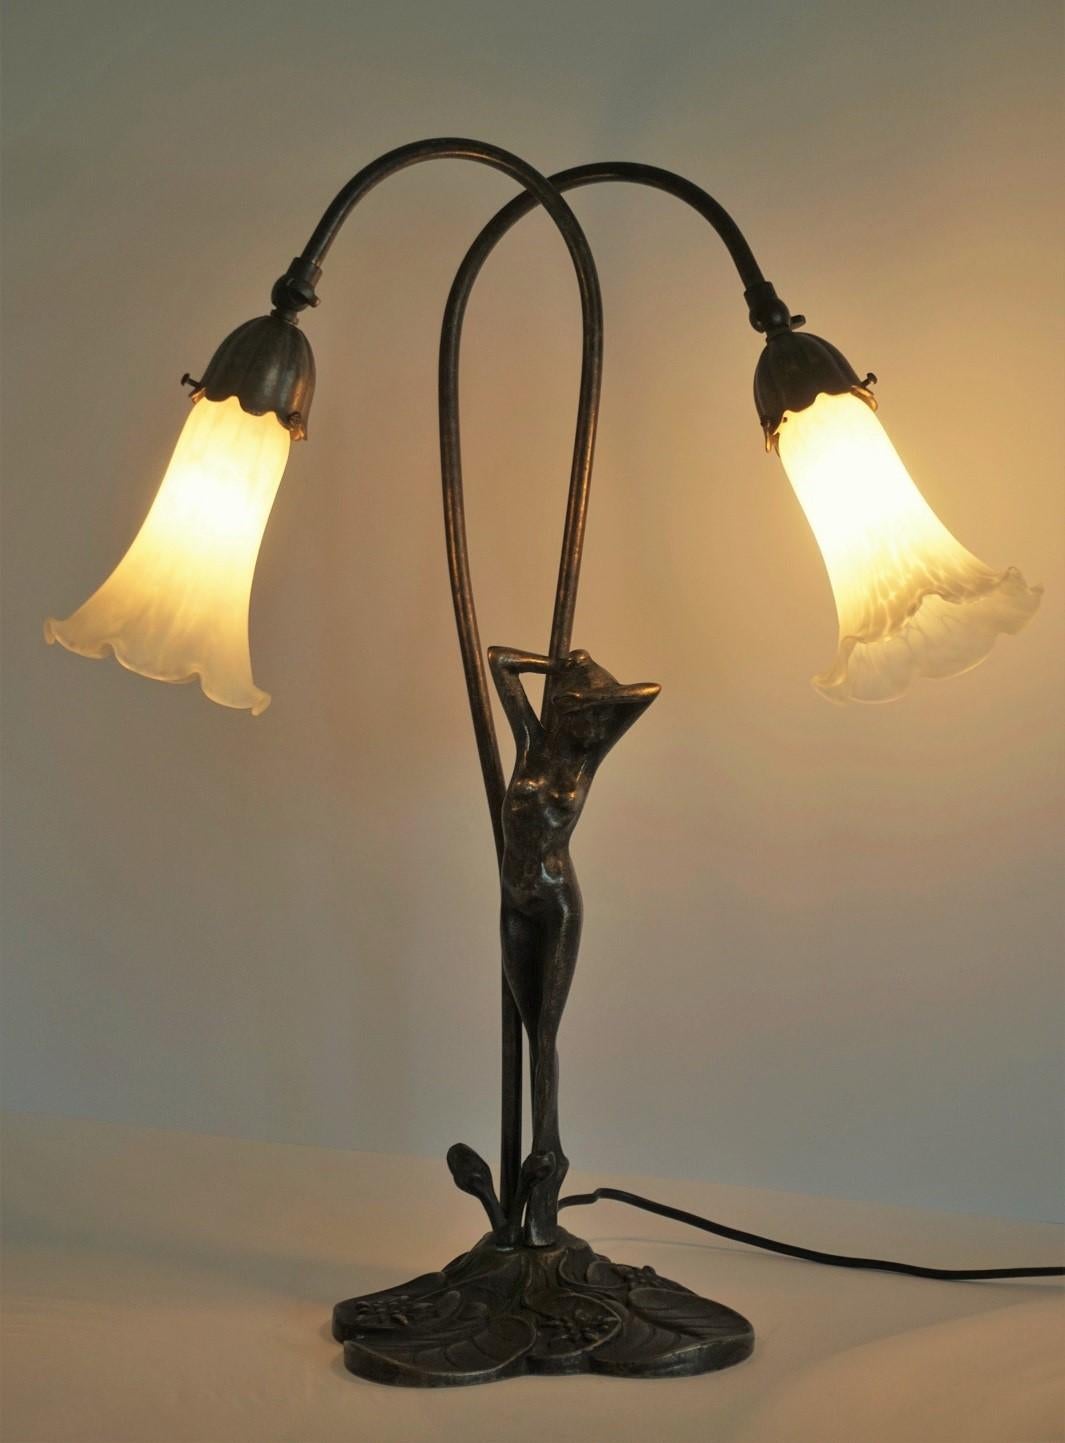 French Art Deco Bronze Figurine Articulated Double Arm Table Lamp For Sale 6